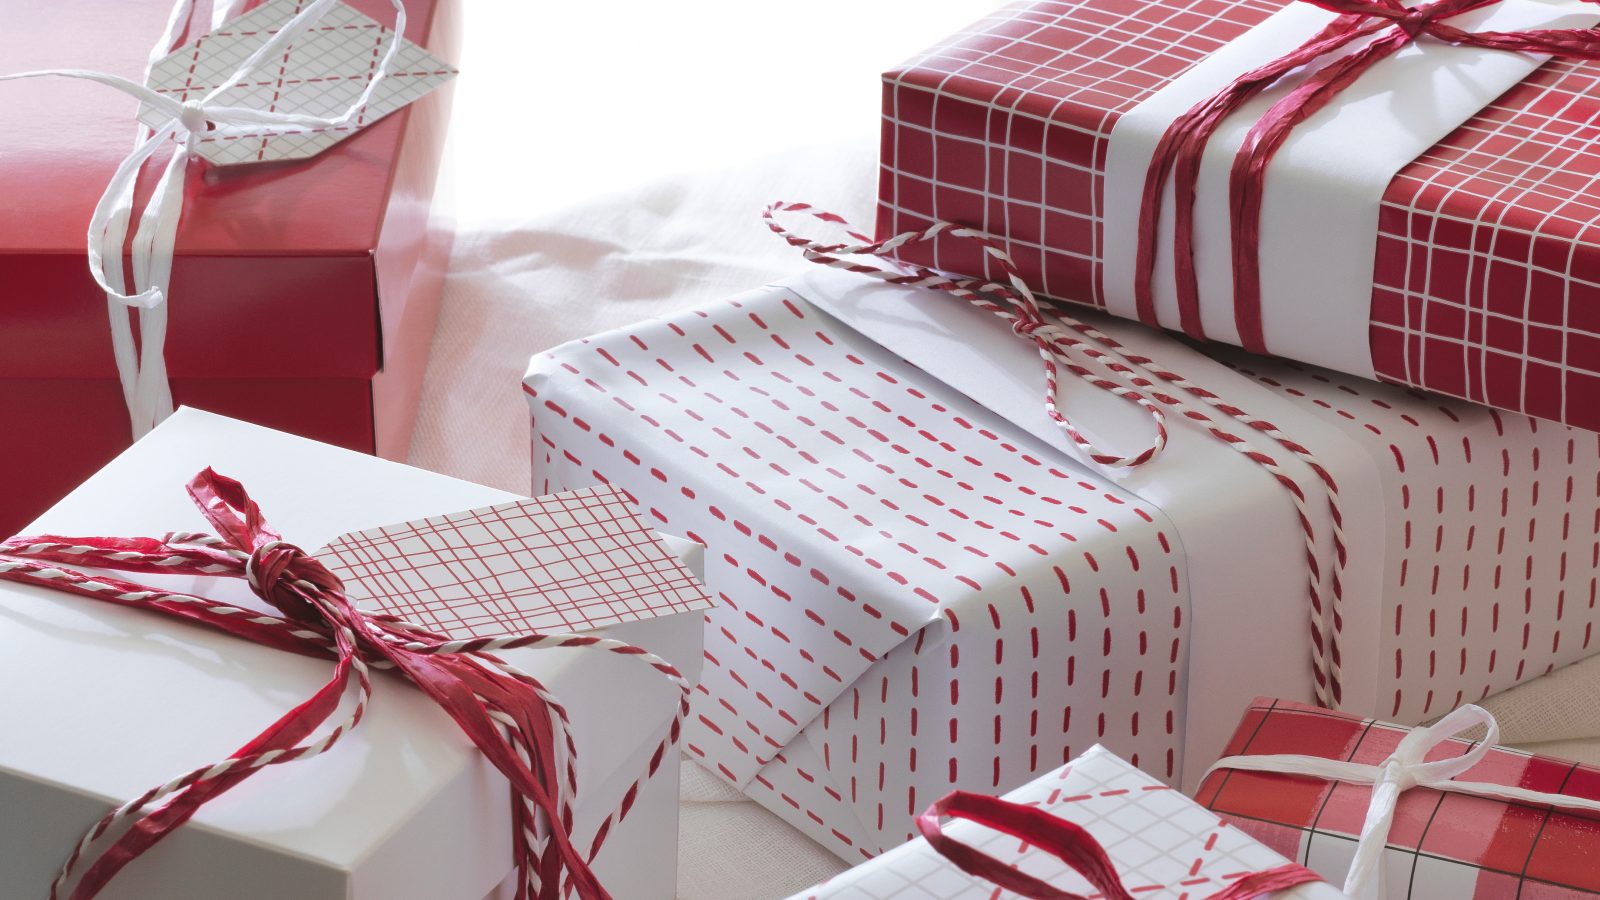 Wrapped Christmas presents with red and white gift wrap.